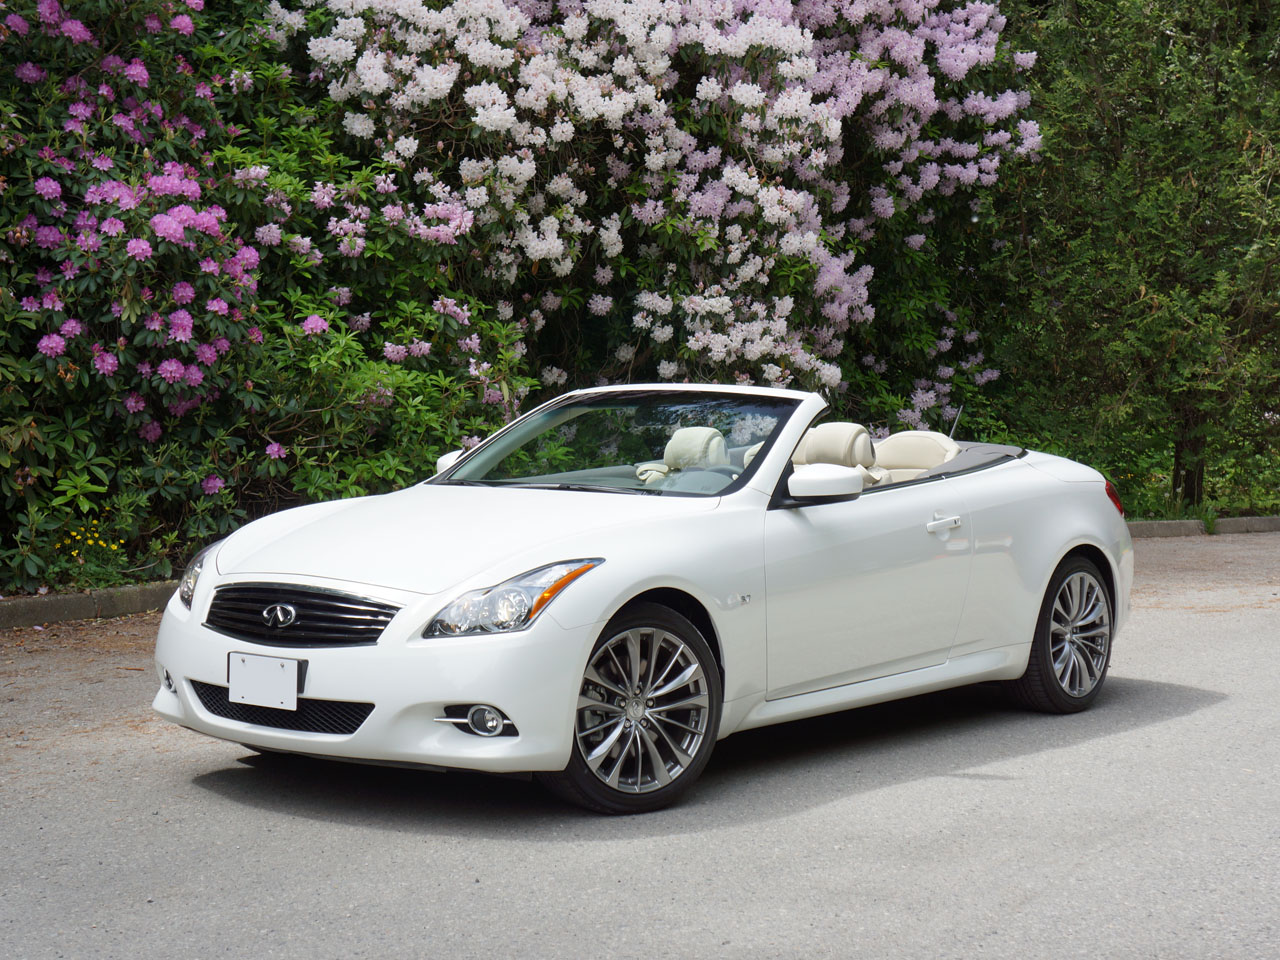 2014 Infiniti Q60 Convertible Road Test Review | The Car Magazine